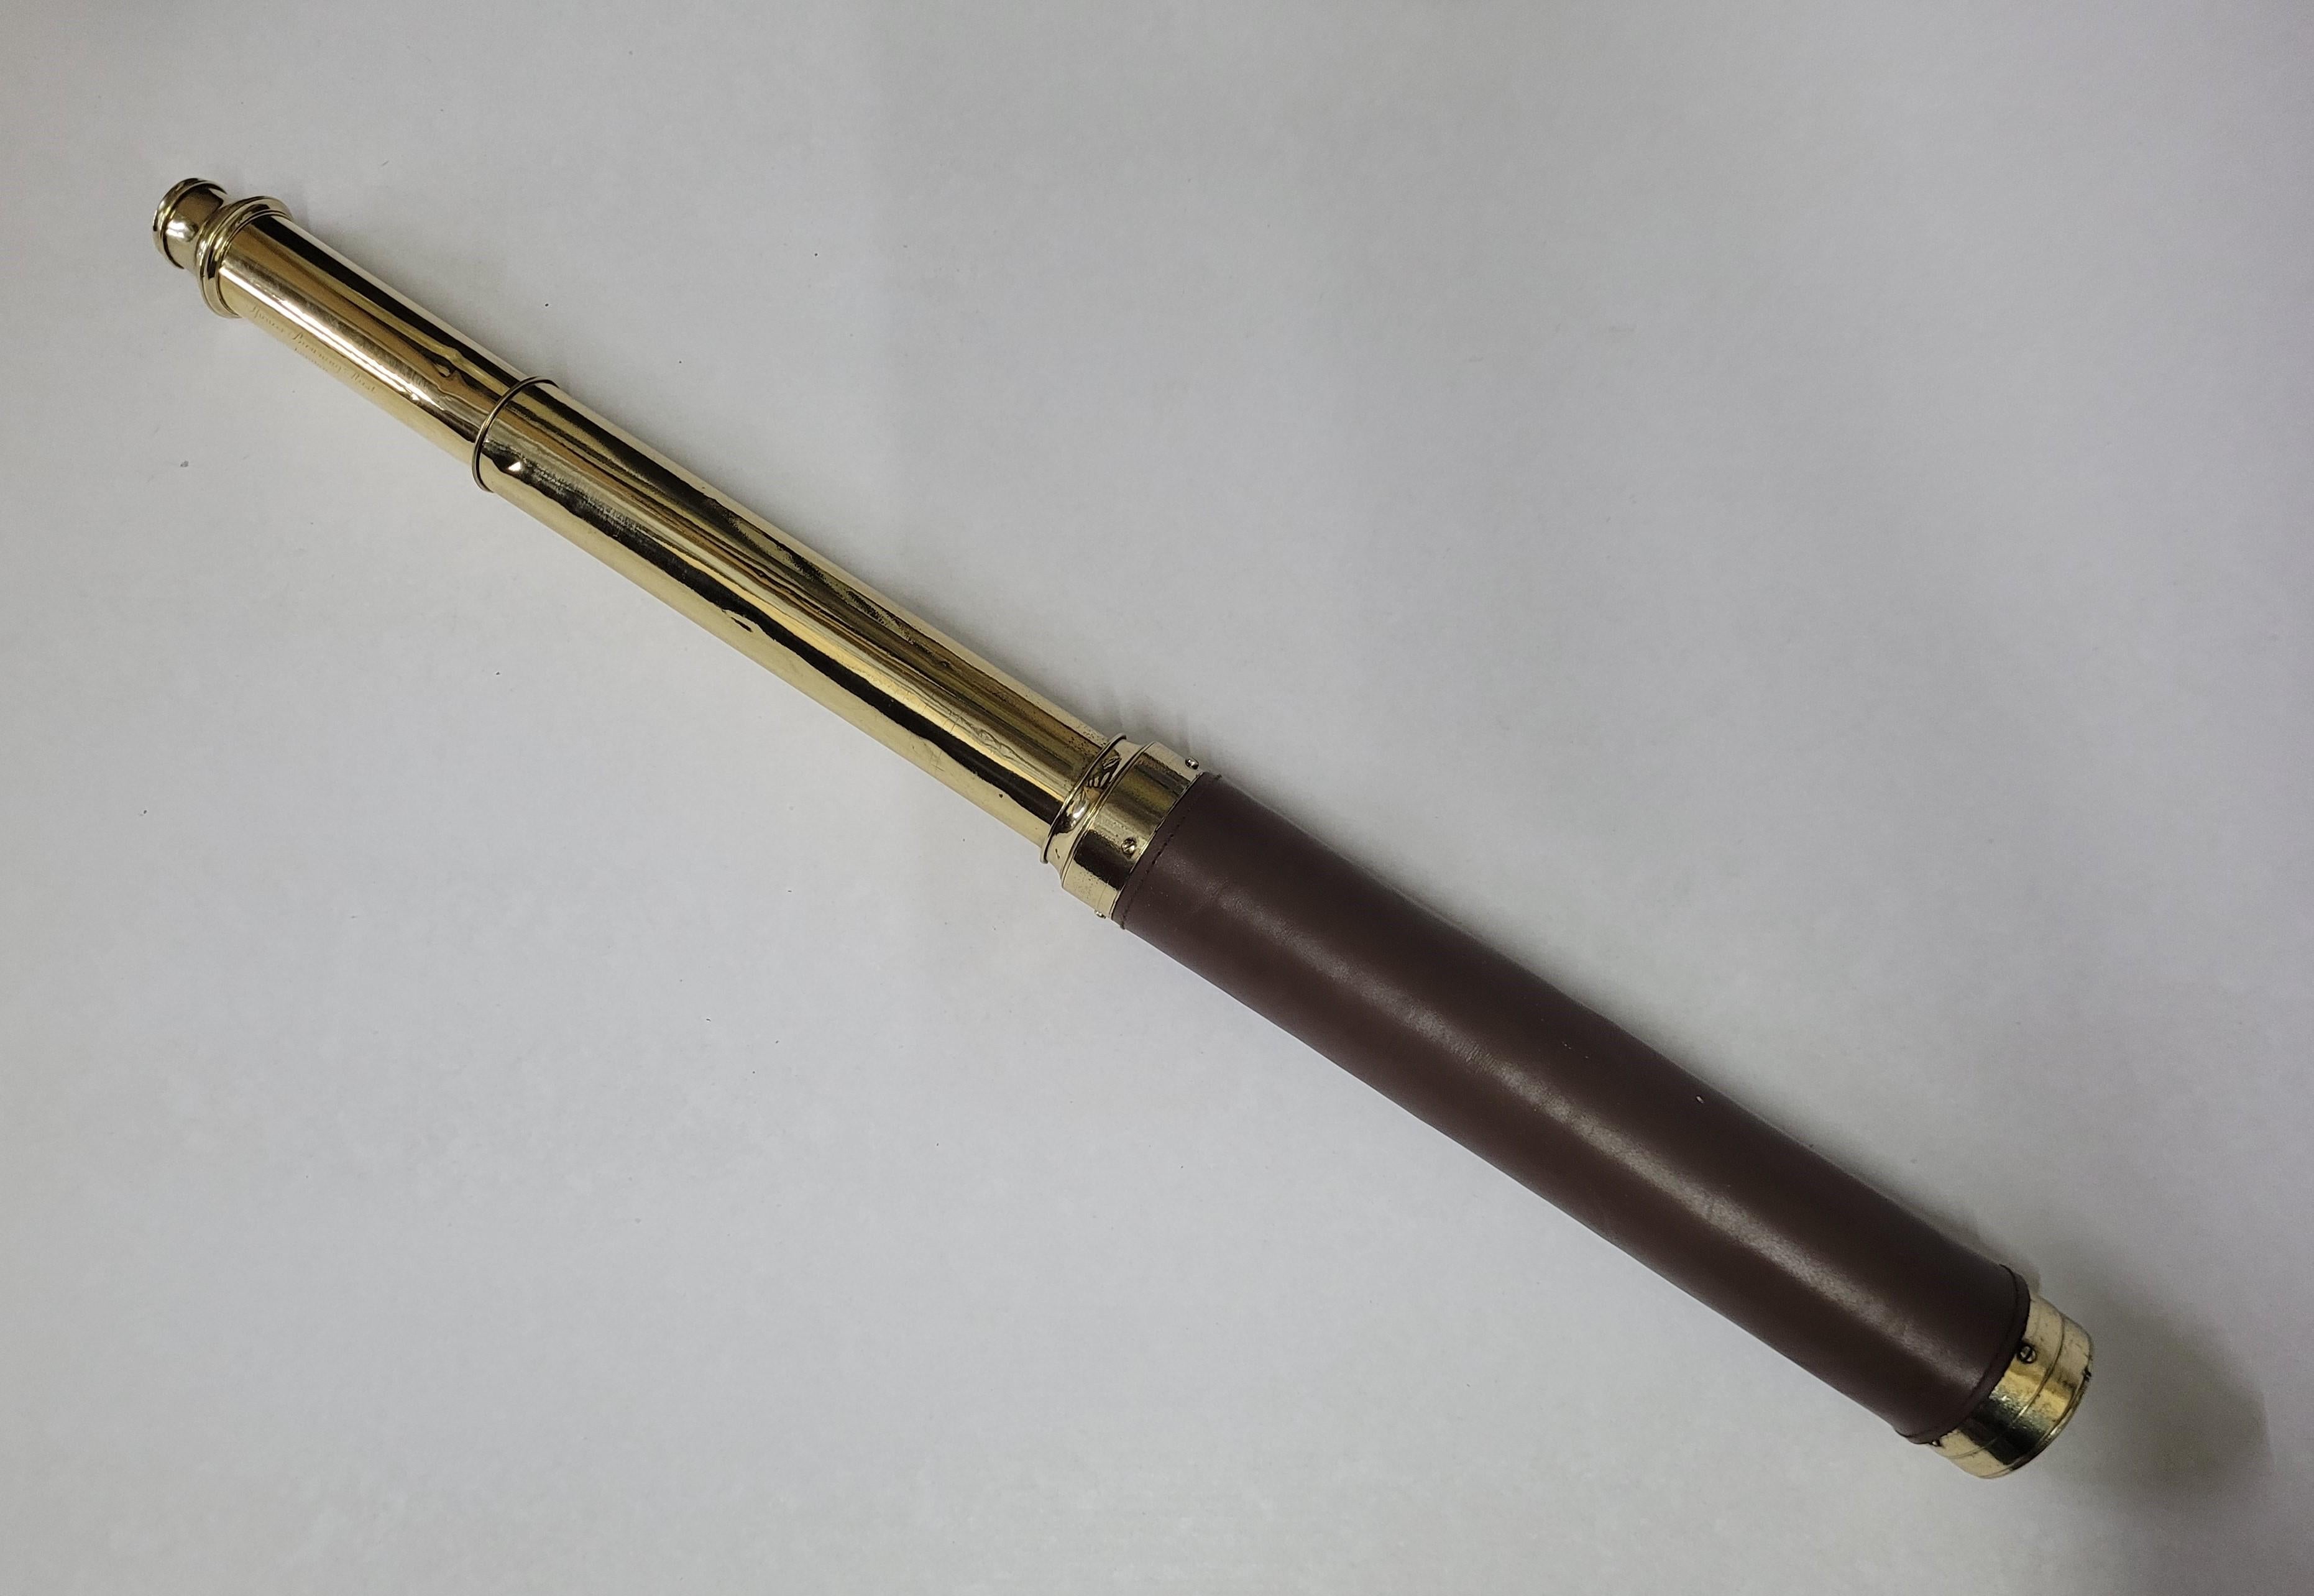 Ships spyglass telescope appropriate for use on yacht, ship, or anywhere with a view. This one has its barrel covered in brown leather. This marine relic has been meticulously polished and lacquered. We just restored a great collection of these.